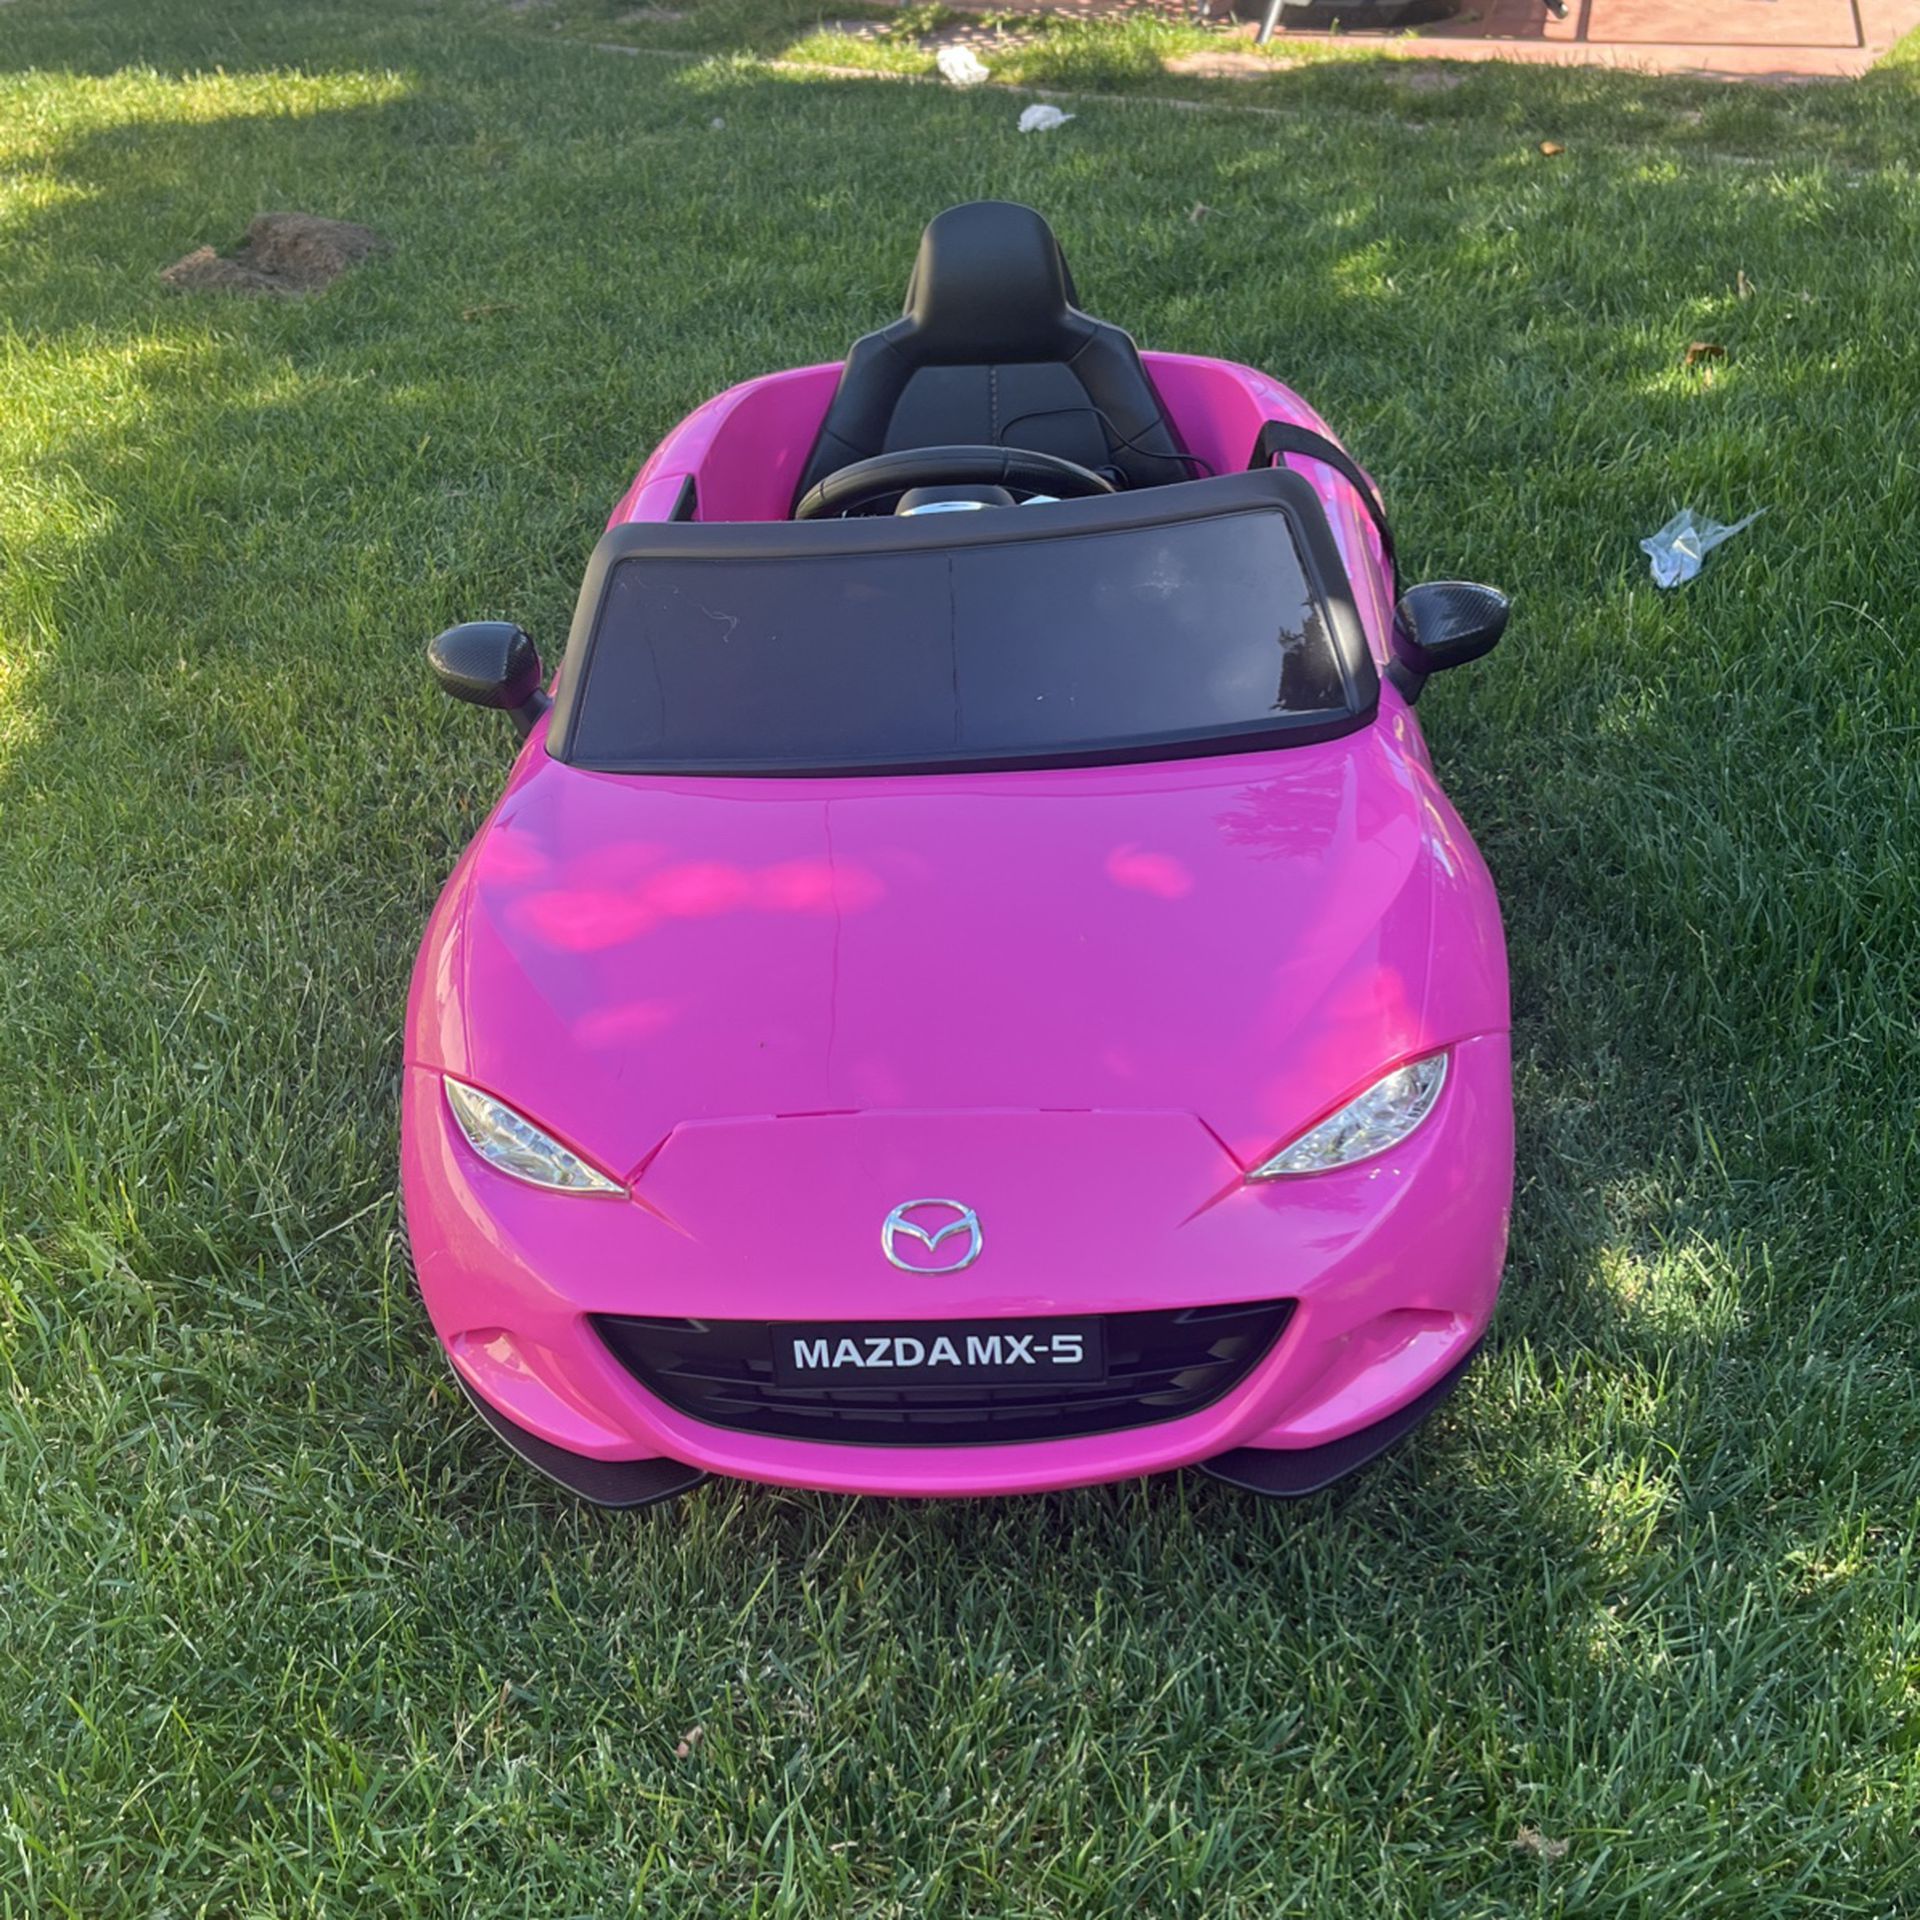 12V Ride On Car, Licensed Mazda MX-5 Electric Car for Kids Ride on Toys with Parent Remote Control, Lights, Music-Pink